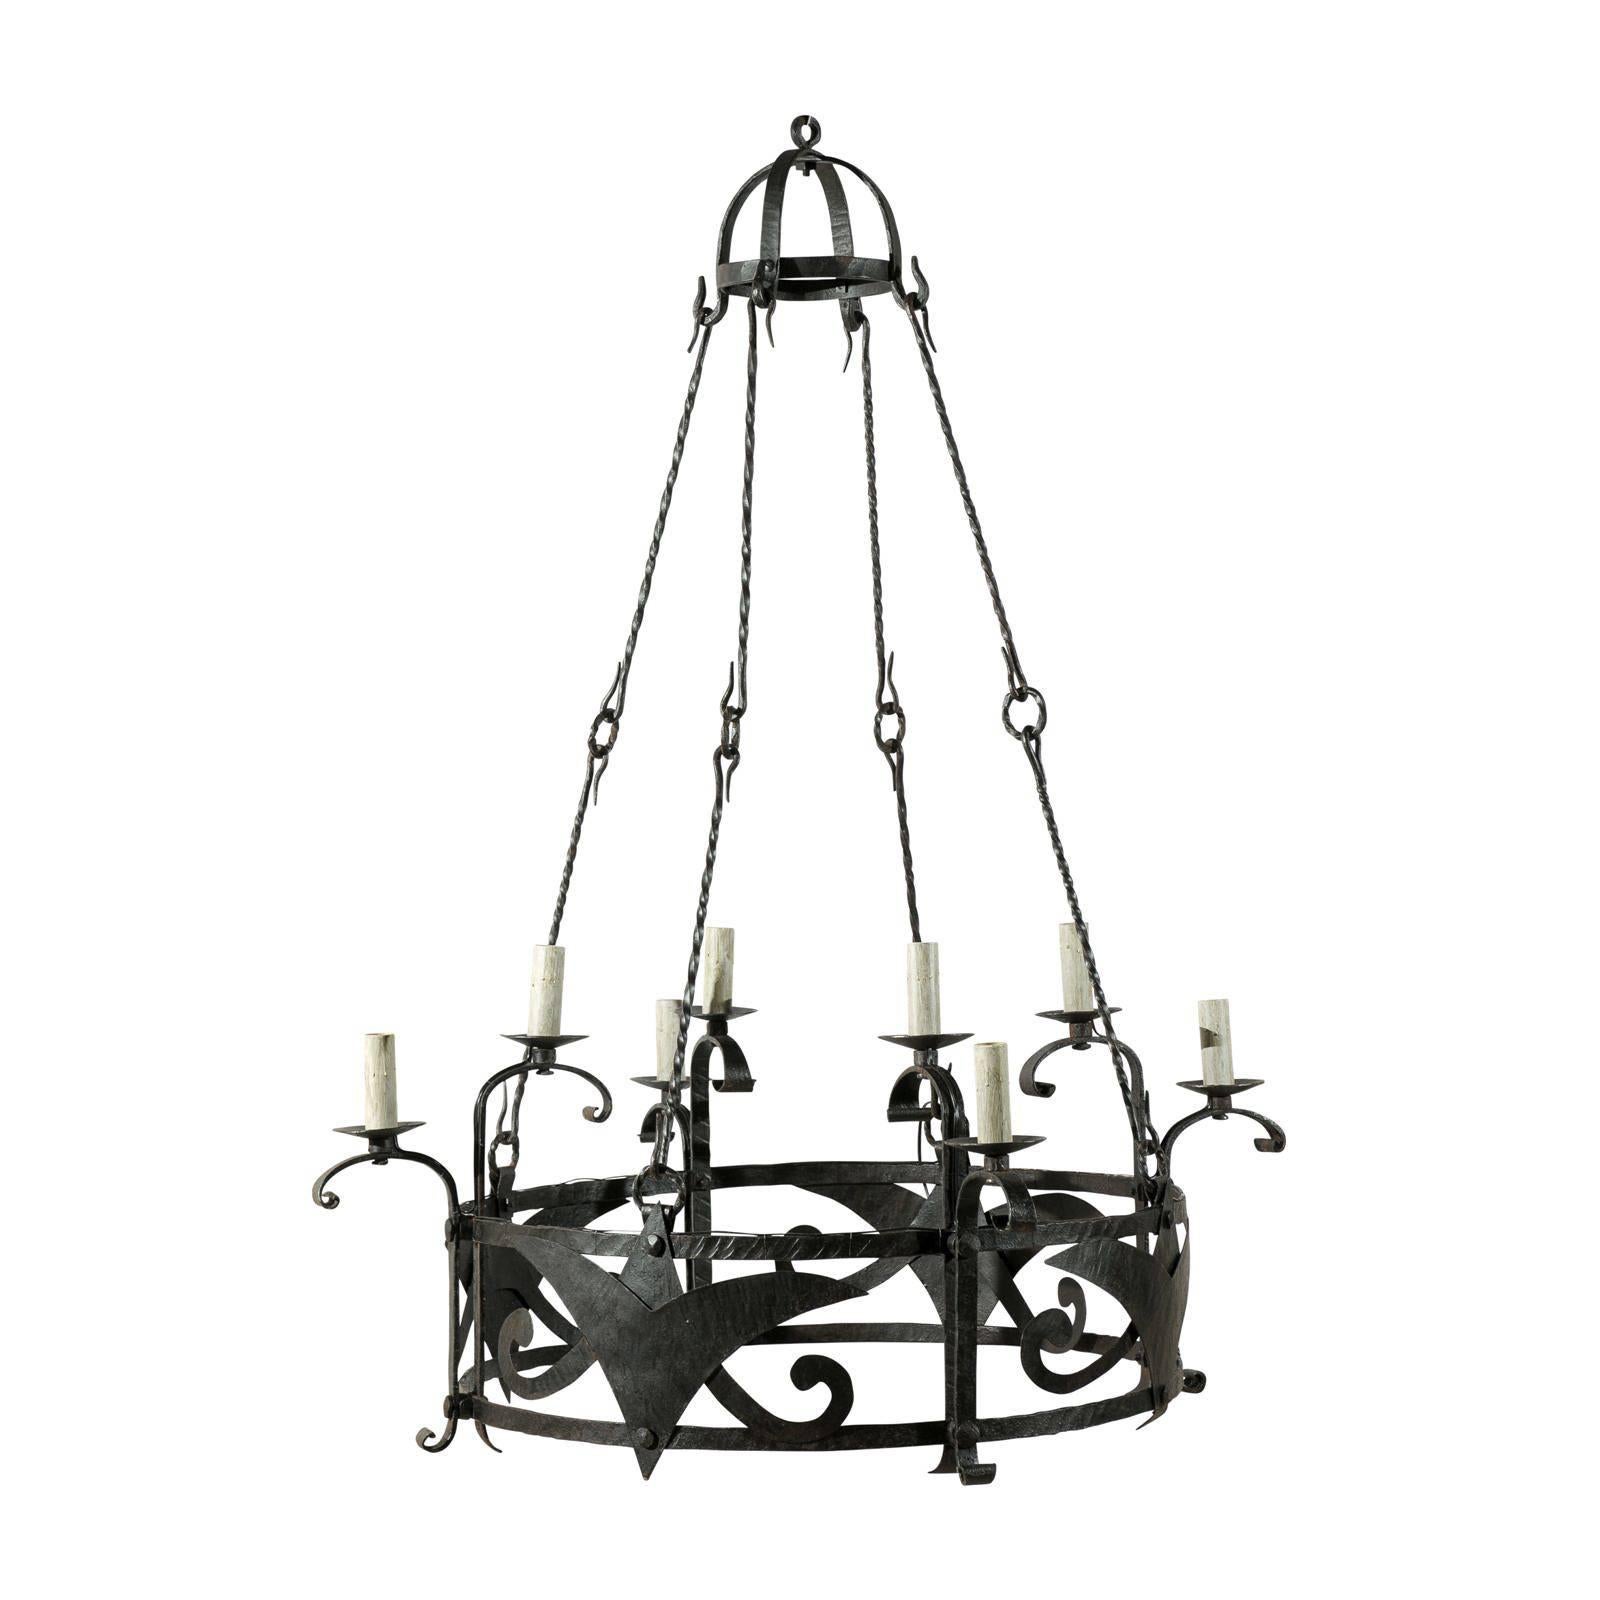 Italian Large-Sized Forged-Iron Suspended Ring Chandelier w/Dome Canopy Top